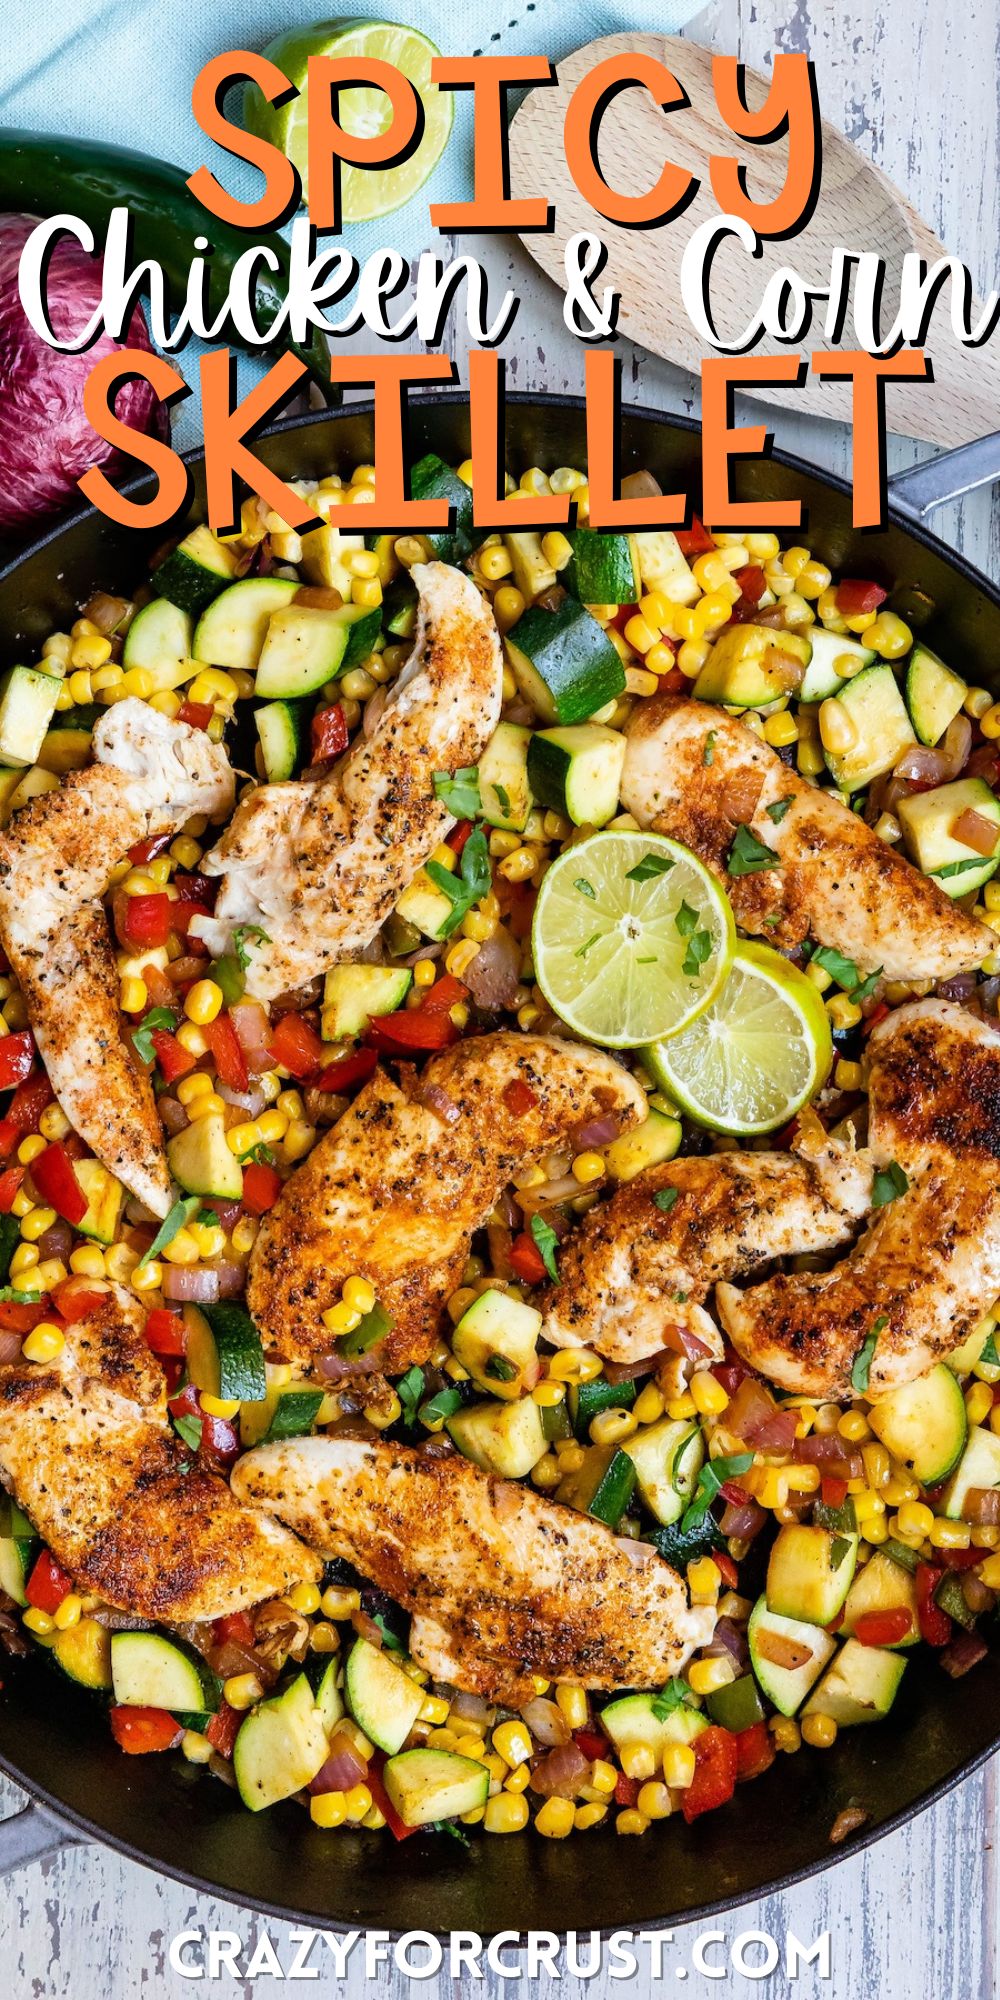 chicken and vegetables in a black skillet with words on the image.